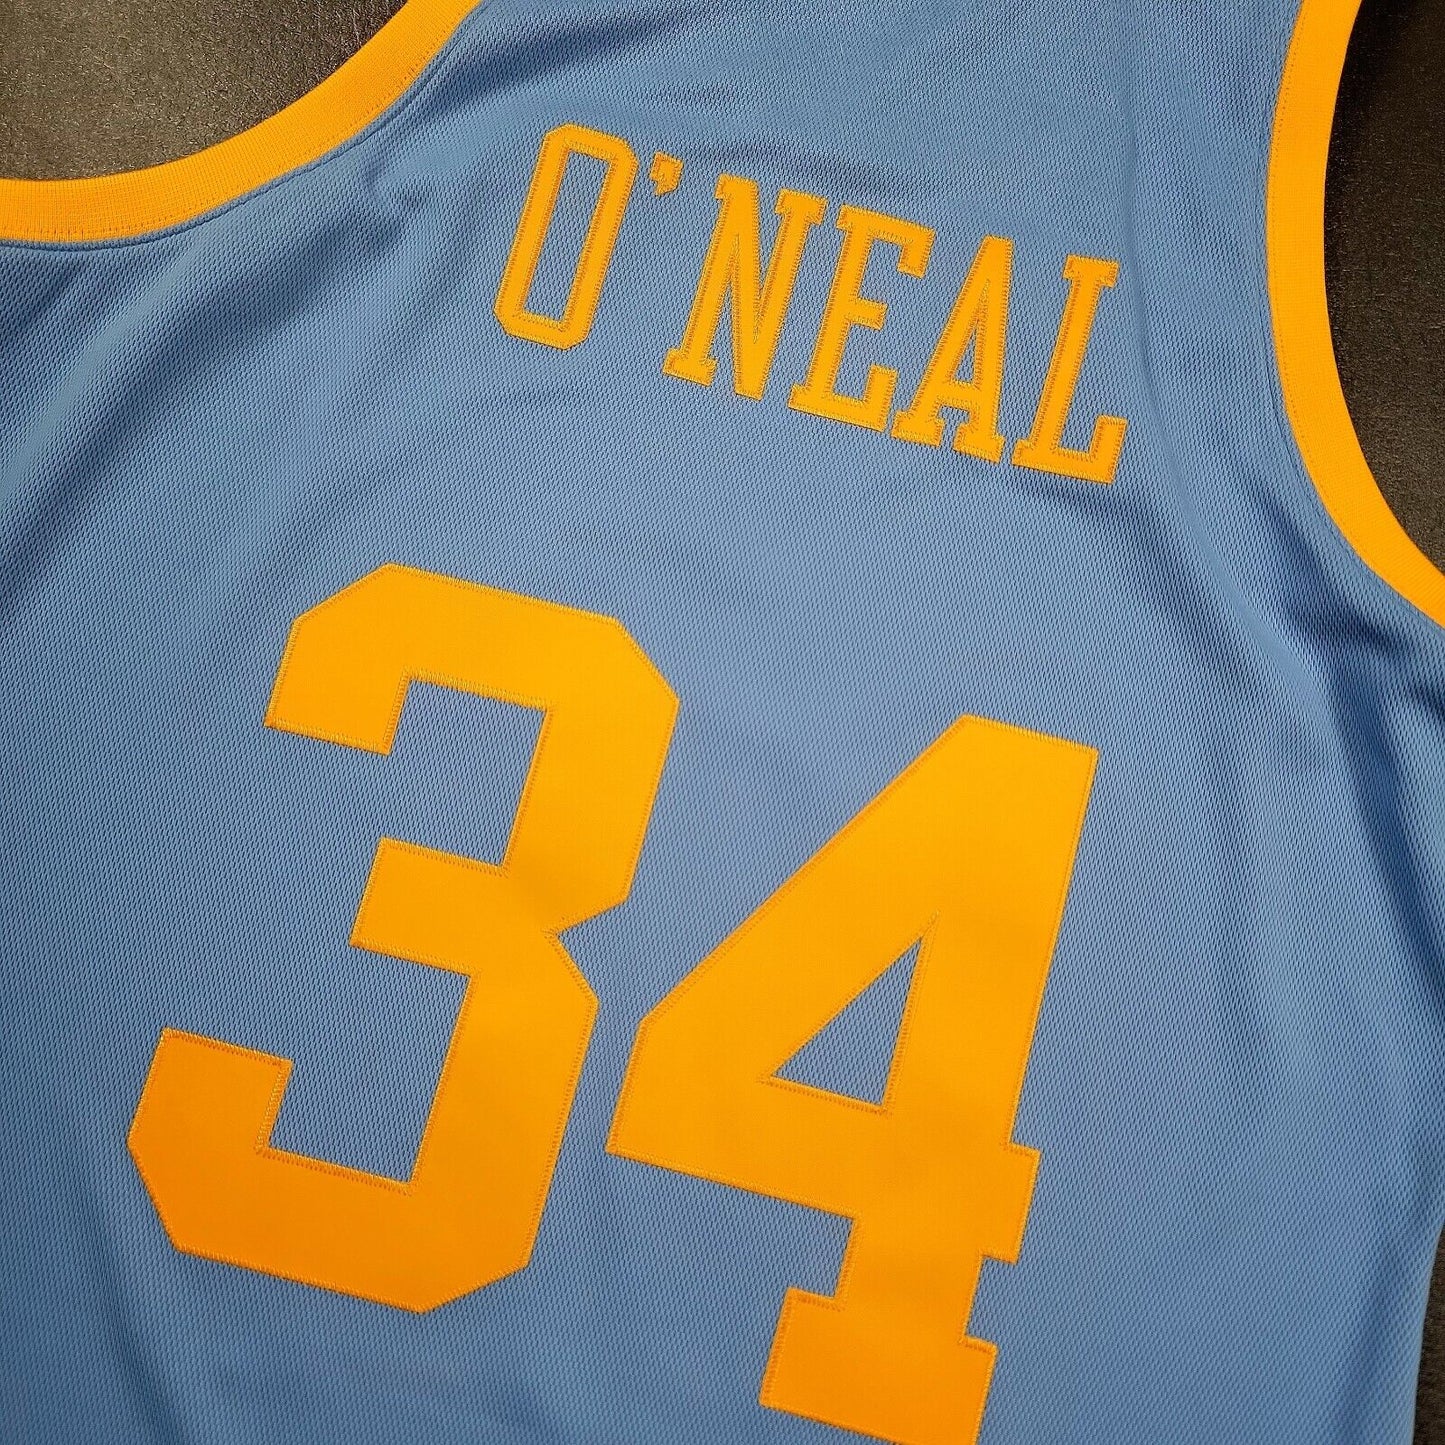 100% Authentic Shaquille O'Neal Mitchell Ness 01 02 Lakers Jersey Size 44 L kobe